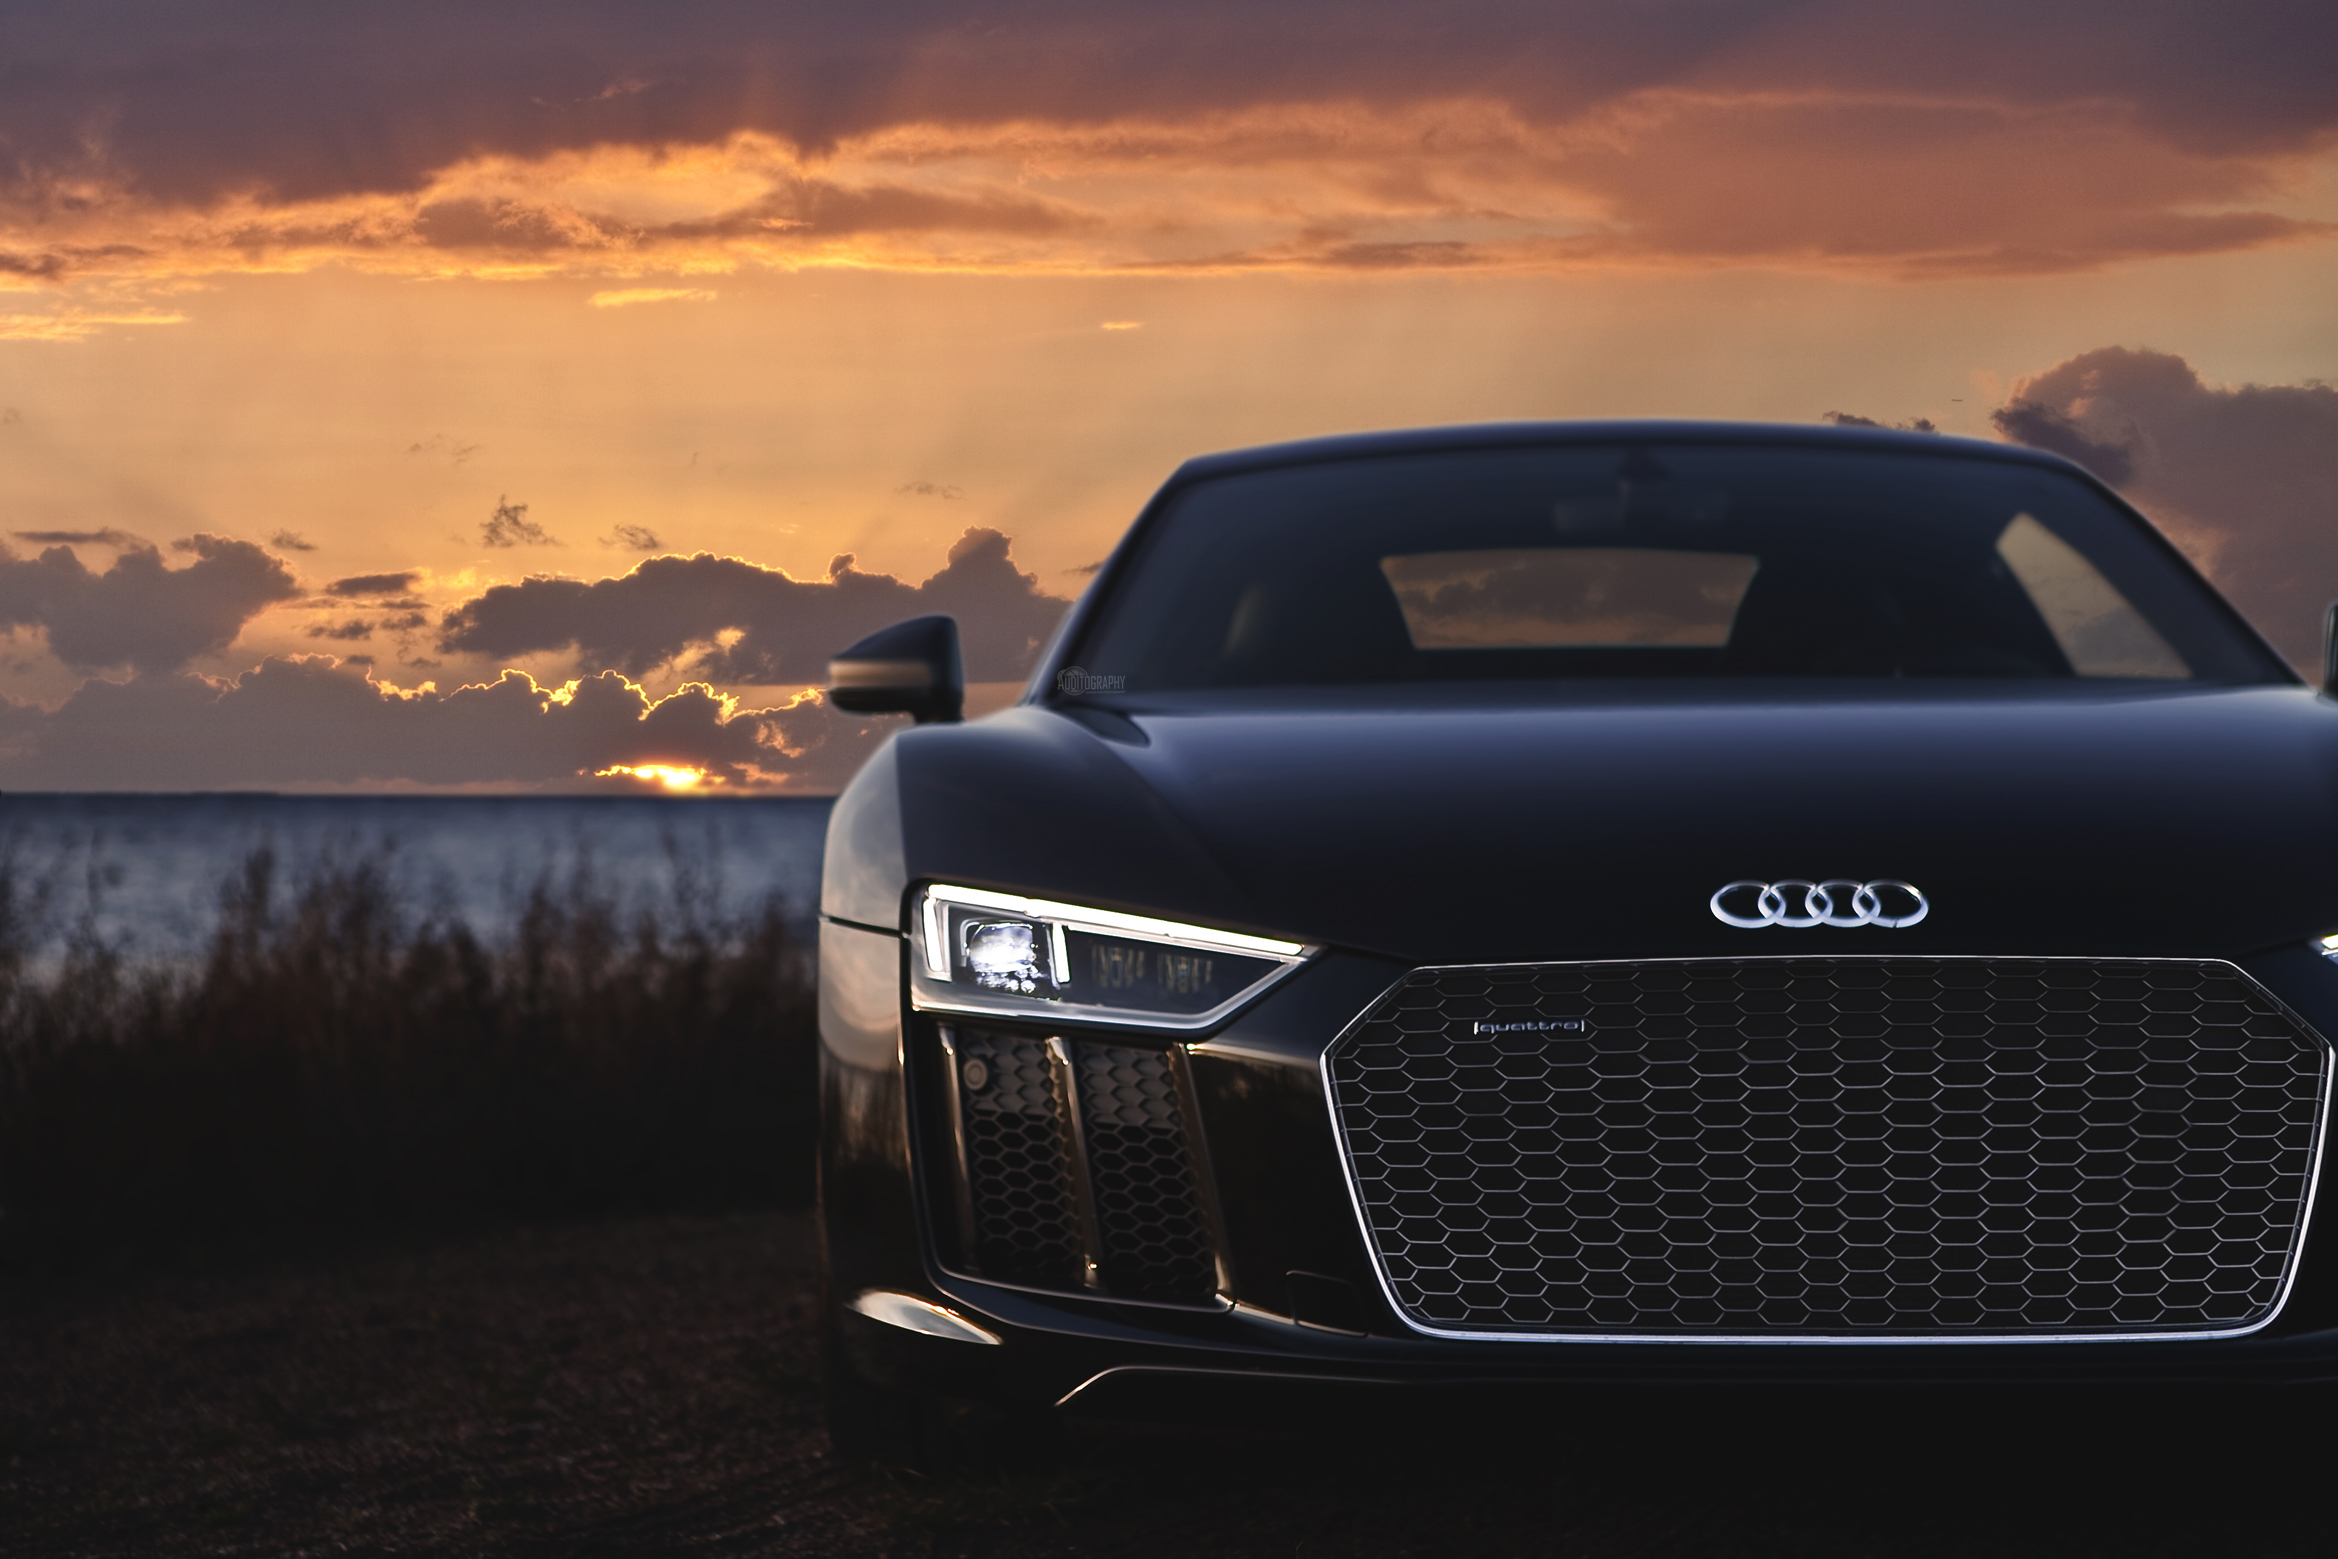 Your Ridiculously Awesome Audi R8 Wallpaper Is Here